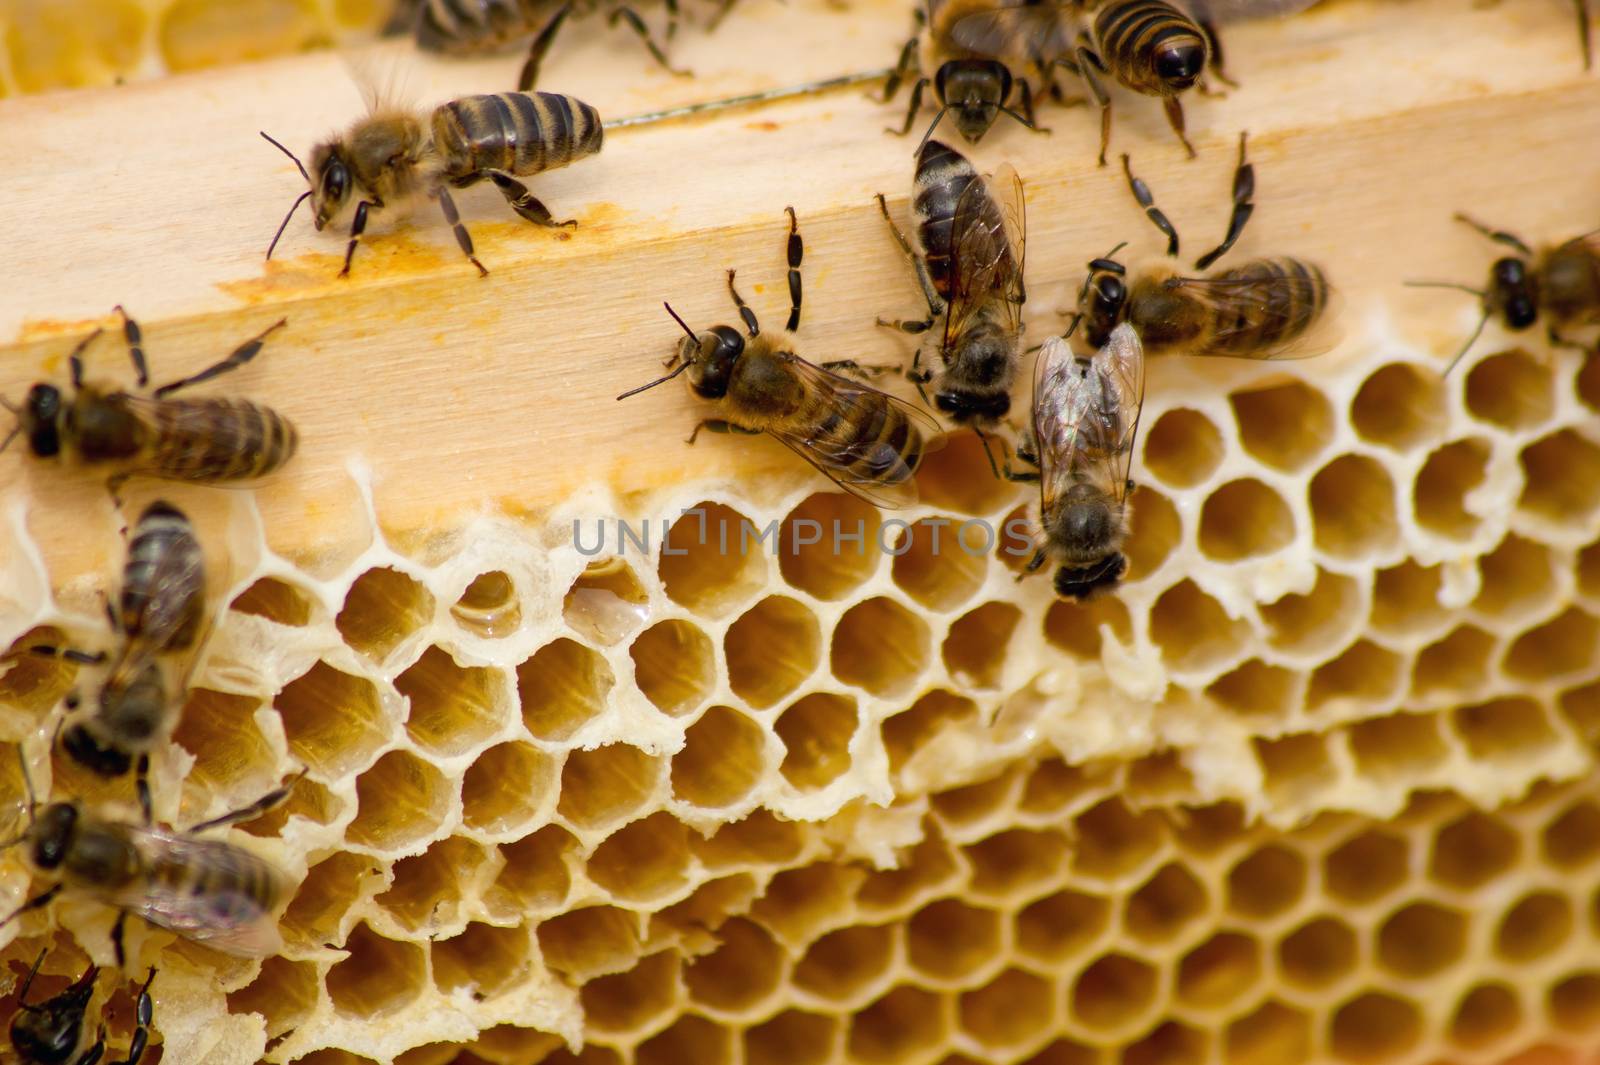 Bees prepare a delicious honey in the hives.